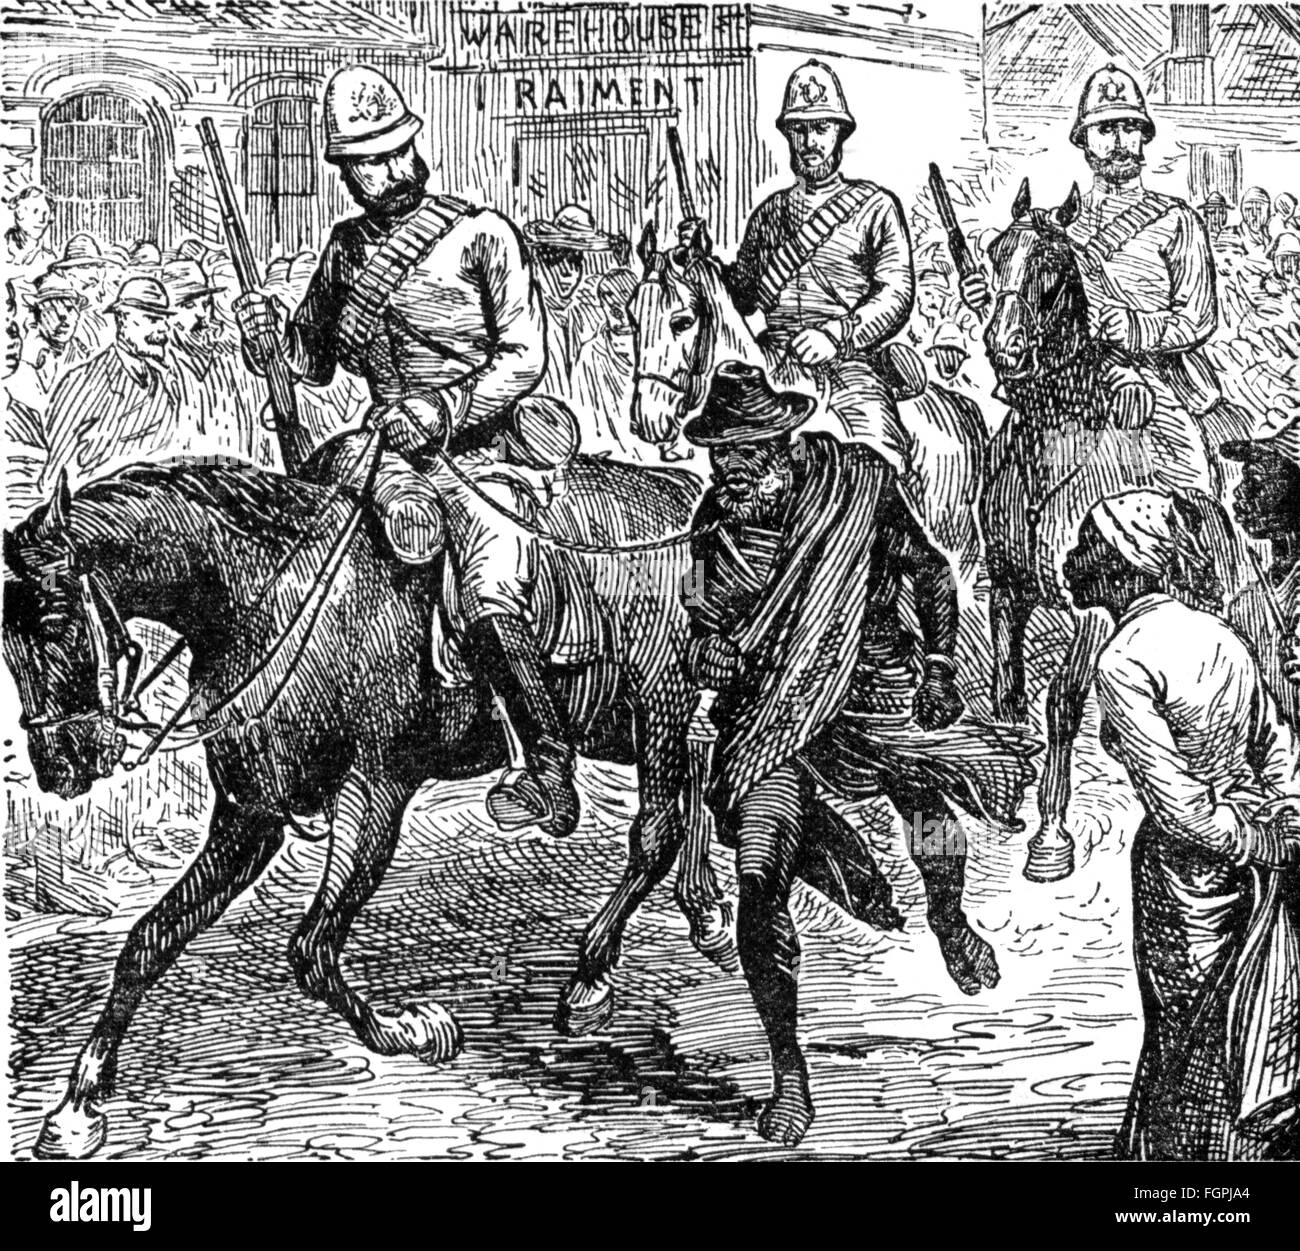 colonialism,Africa,British soldiers leading the chief of an insurgent South African tribe through the streets,wood engraving,19th century,19th century,graphic,graphics,imperialism,colonial supremacy,colonial rule,colony,colonies,South Africa,Great Britain,soldiers,soldier,uniform,uniforms,helmet,helmets,rider,riders,horse,horses,riding,captive,captives,insurgent,insurgents,rebel,rebels,revolter,revolters,tribal chieftain,chieftain of a tribe,tribal chieftains,chieftains,humiliation,humiliations,humiliate,humiliating,moc,Additional-Rights-Clearences-Not Available Stock Photo